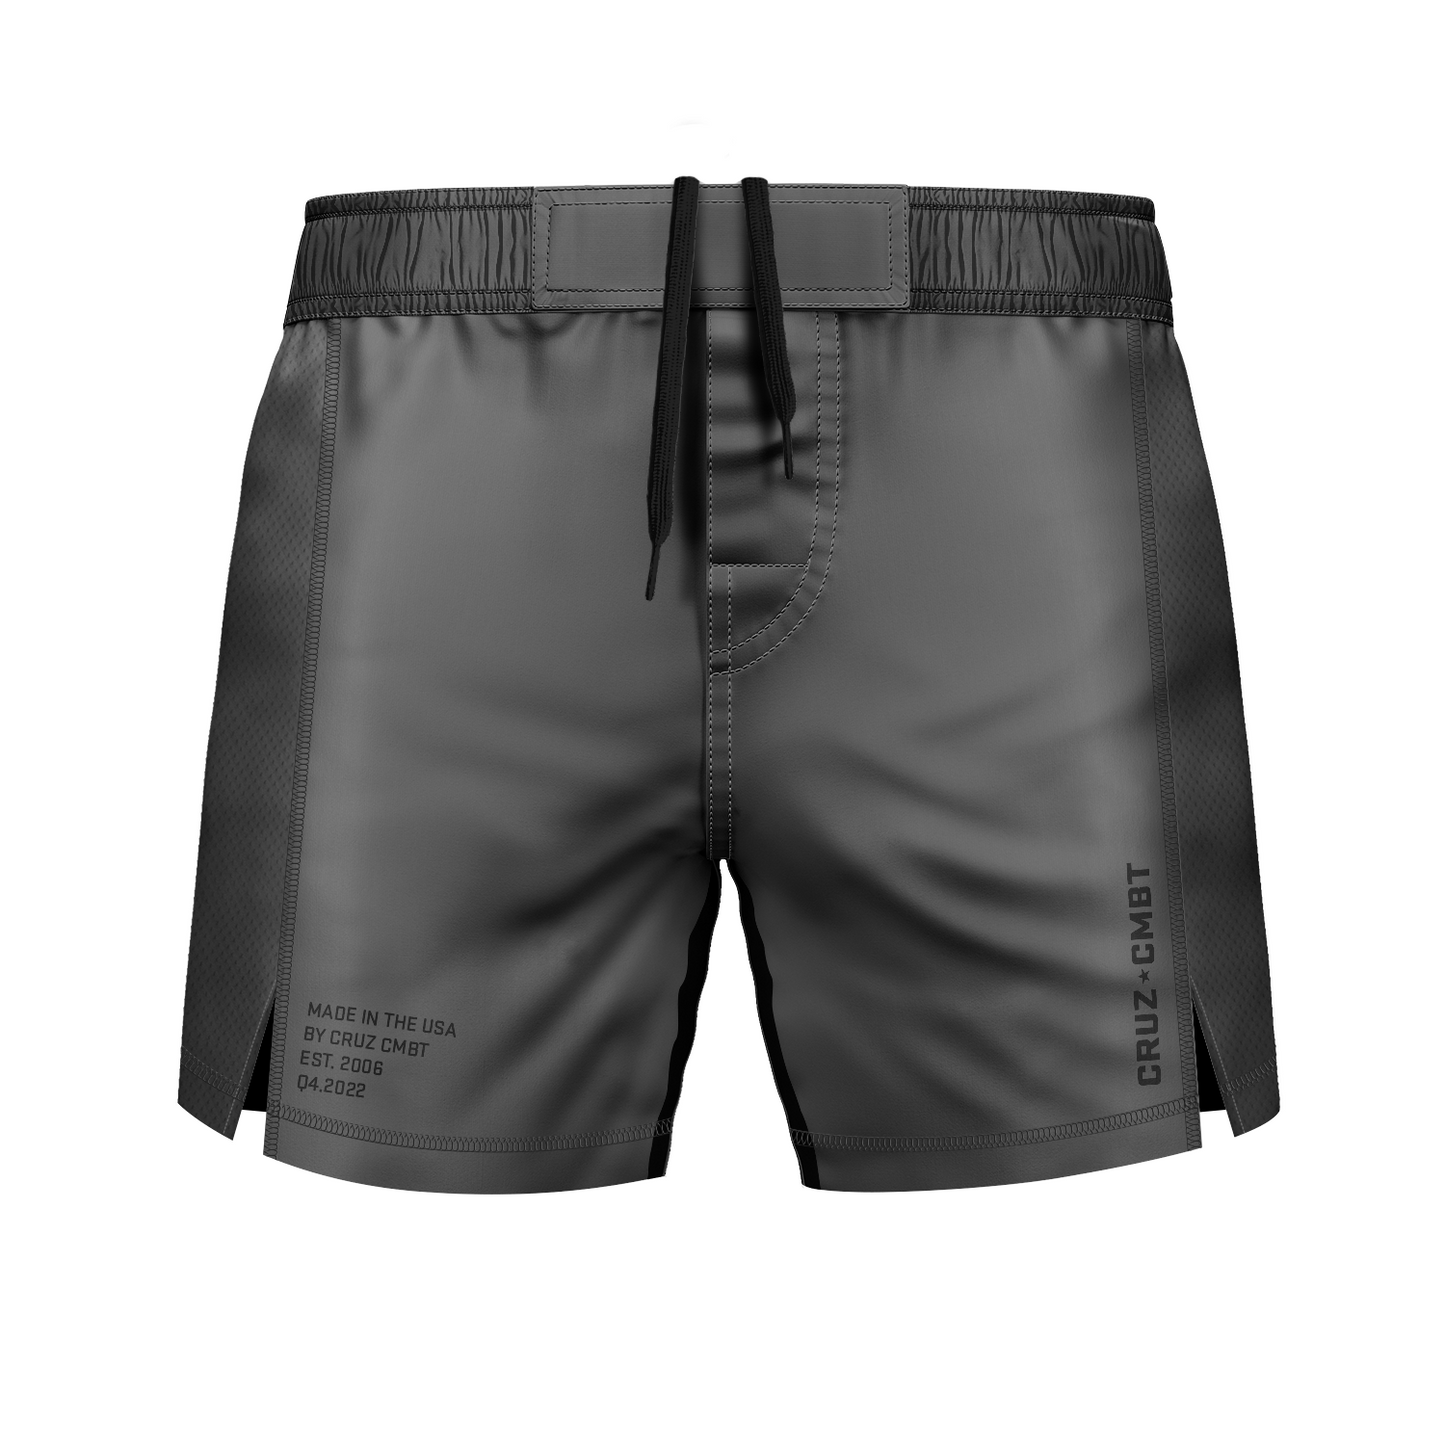 Base Collection men's fight shorts, grey